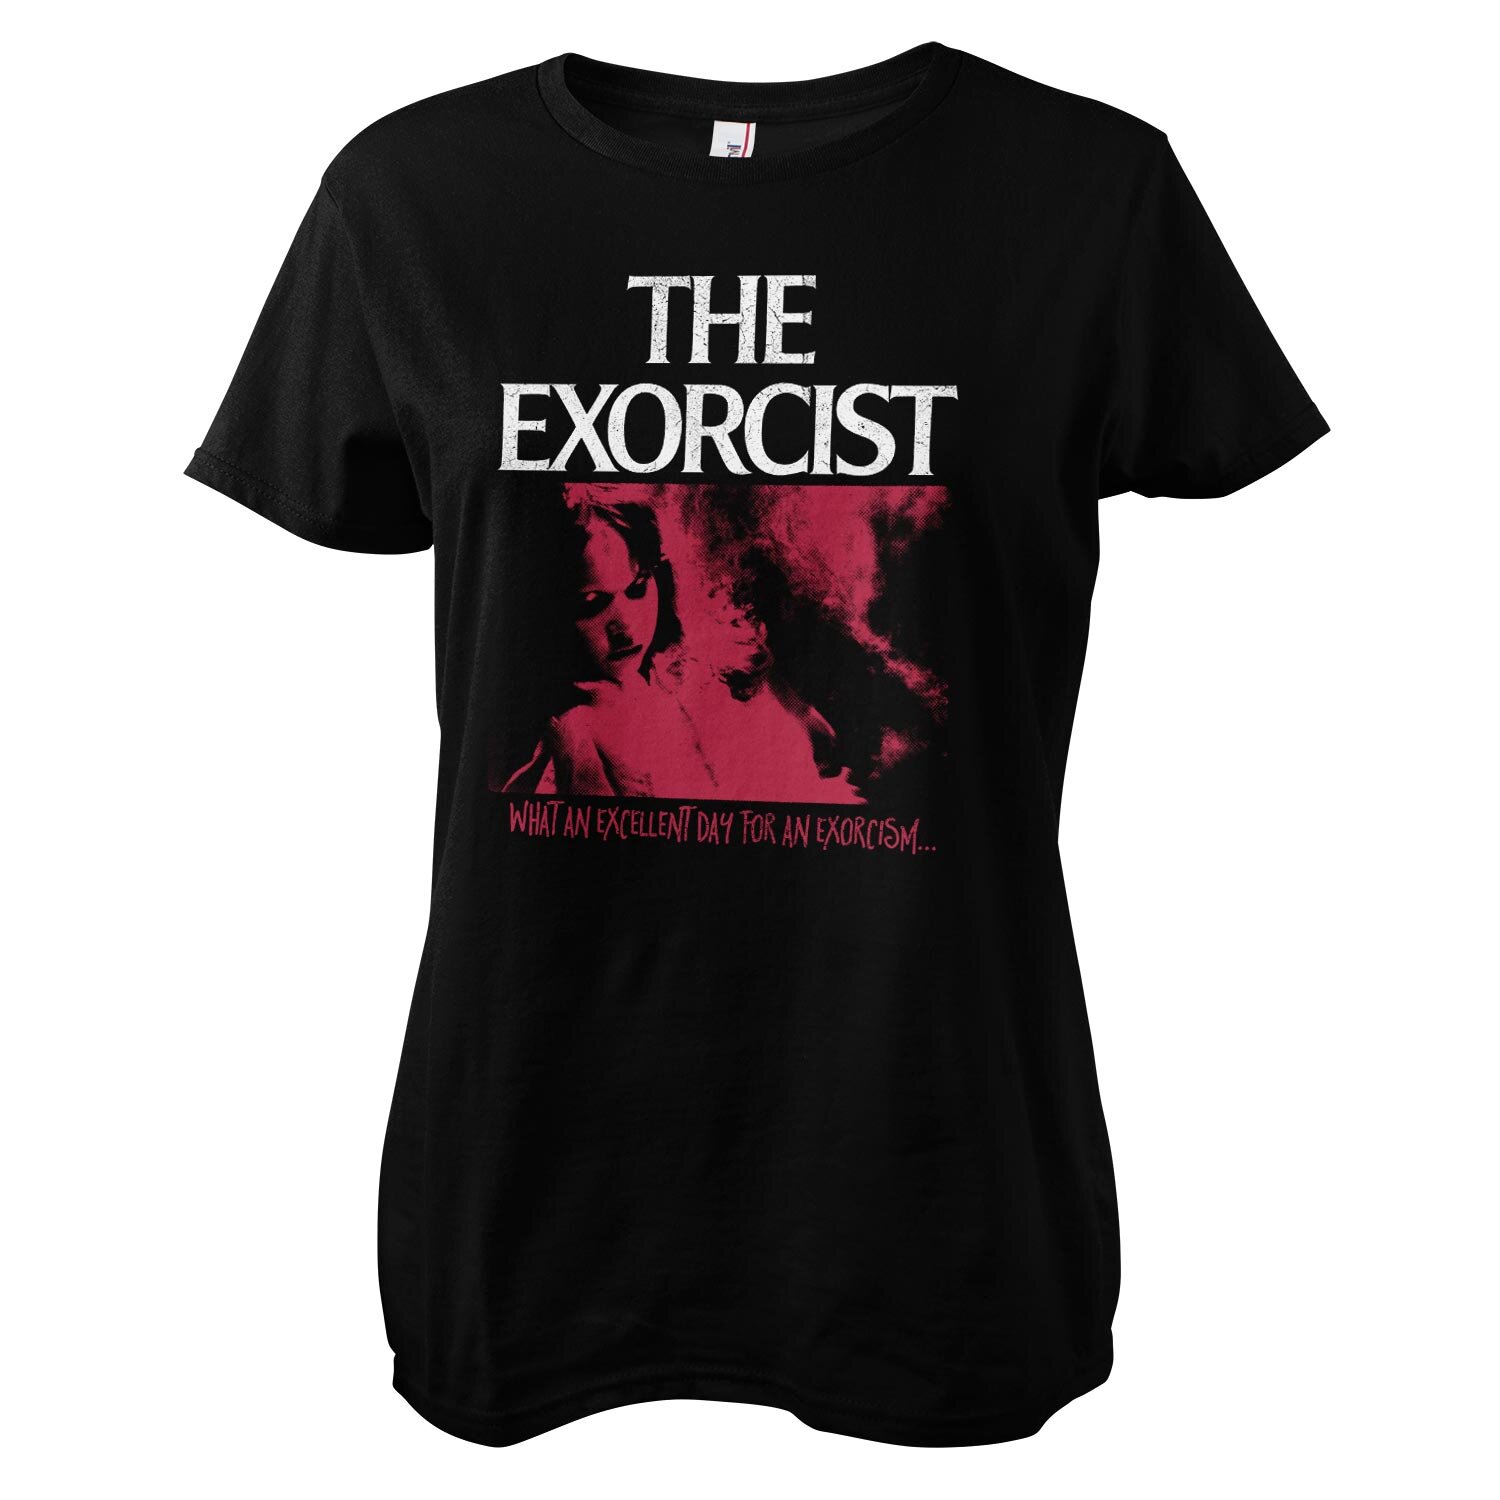 The Exorcist - Excellent Day Girly Tee